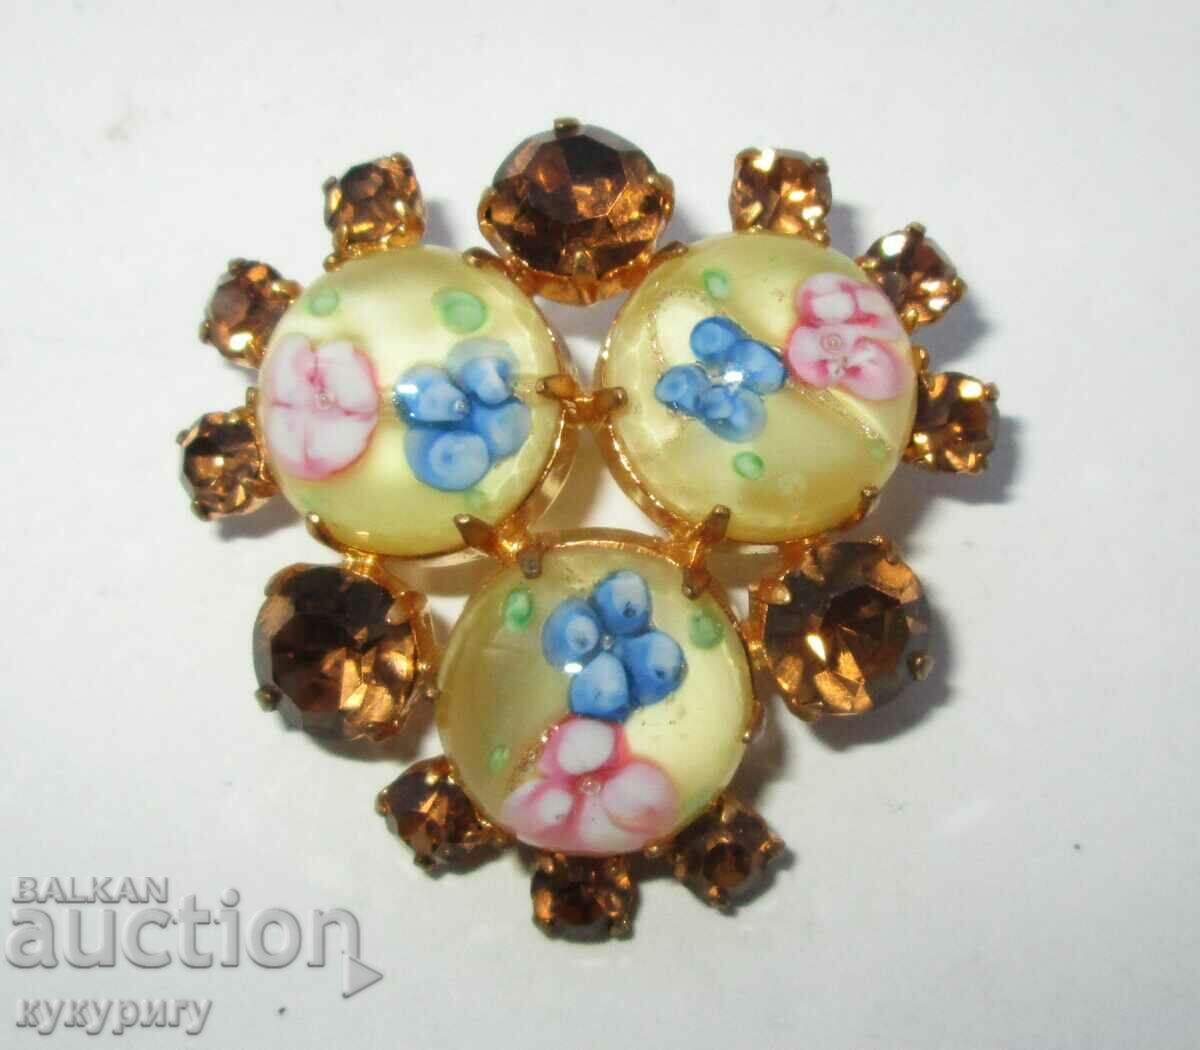 A beautiful old ladies brooch with Murano glass